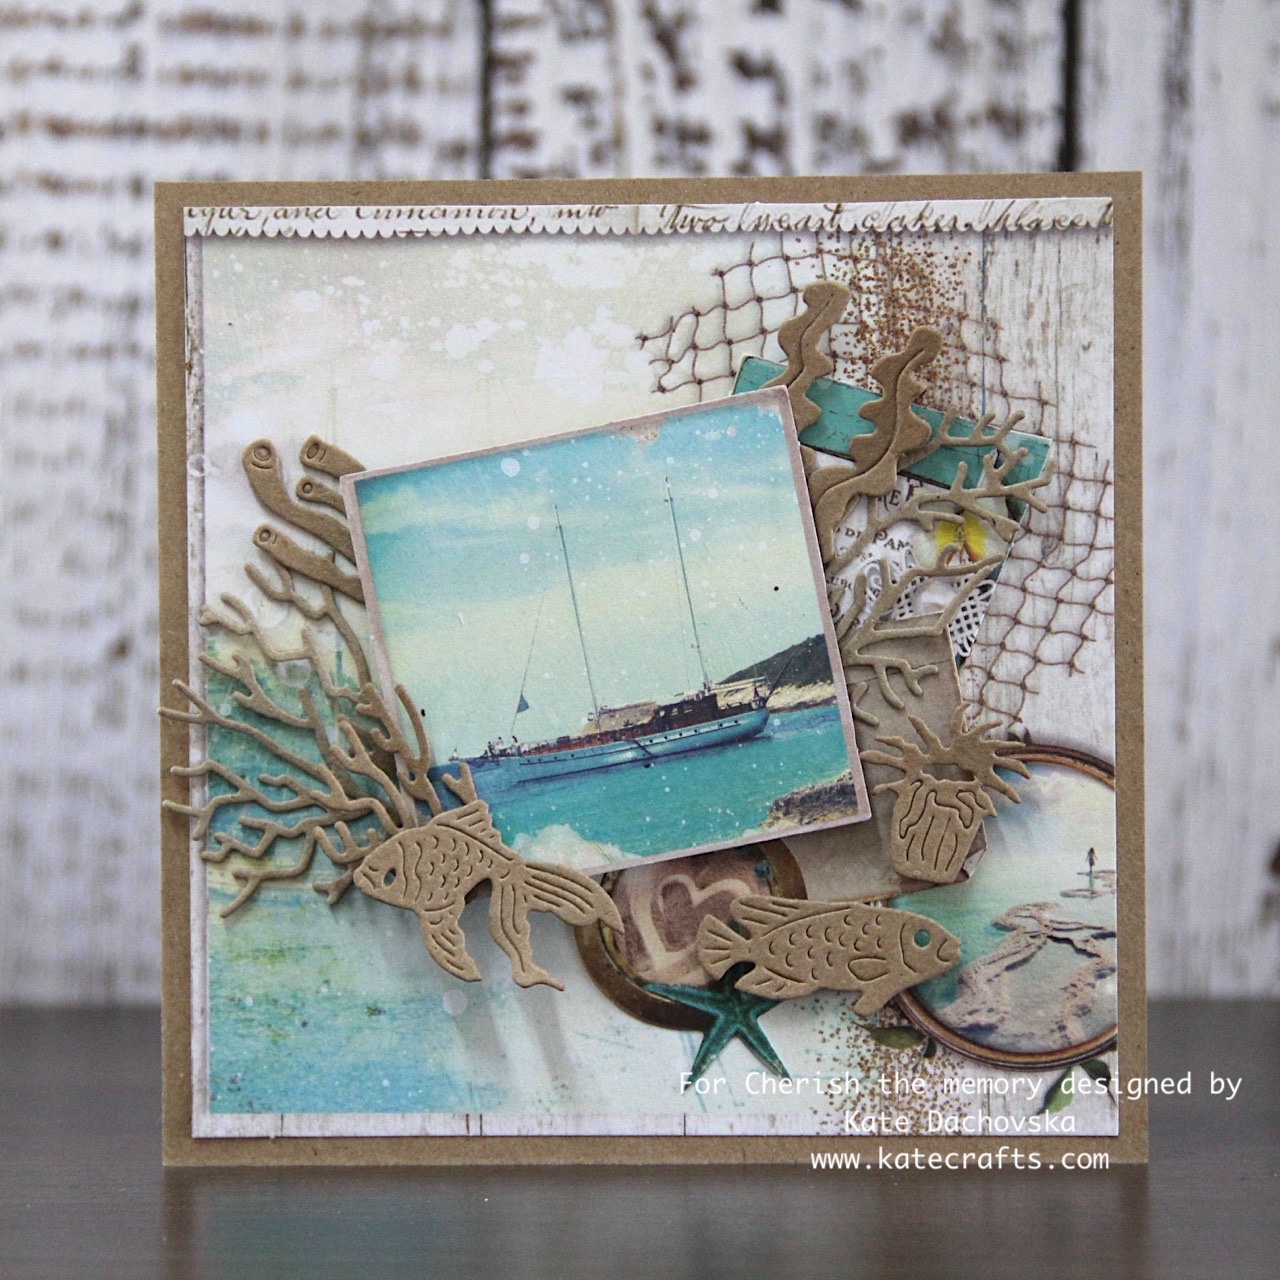 Two summer cards for Cherish the memory | Kate Crafts